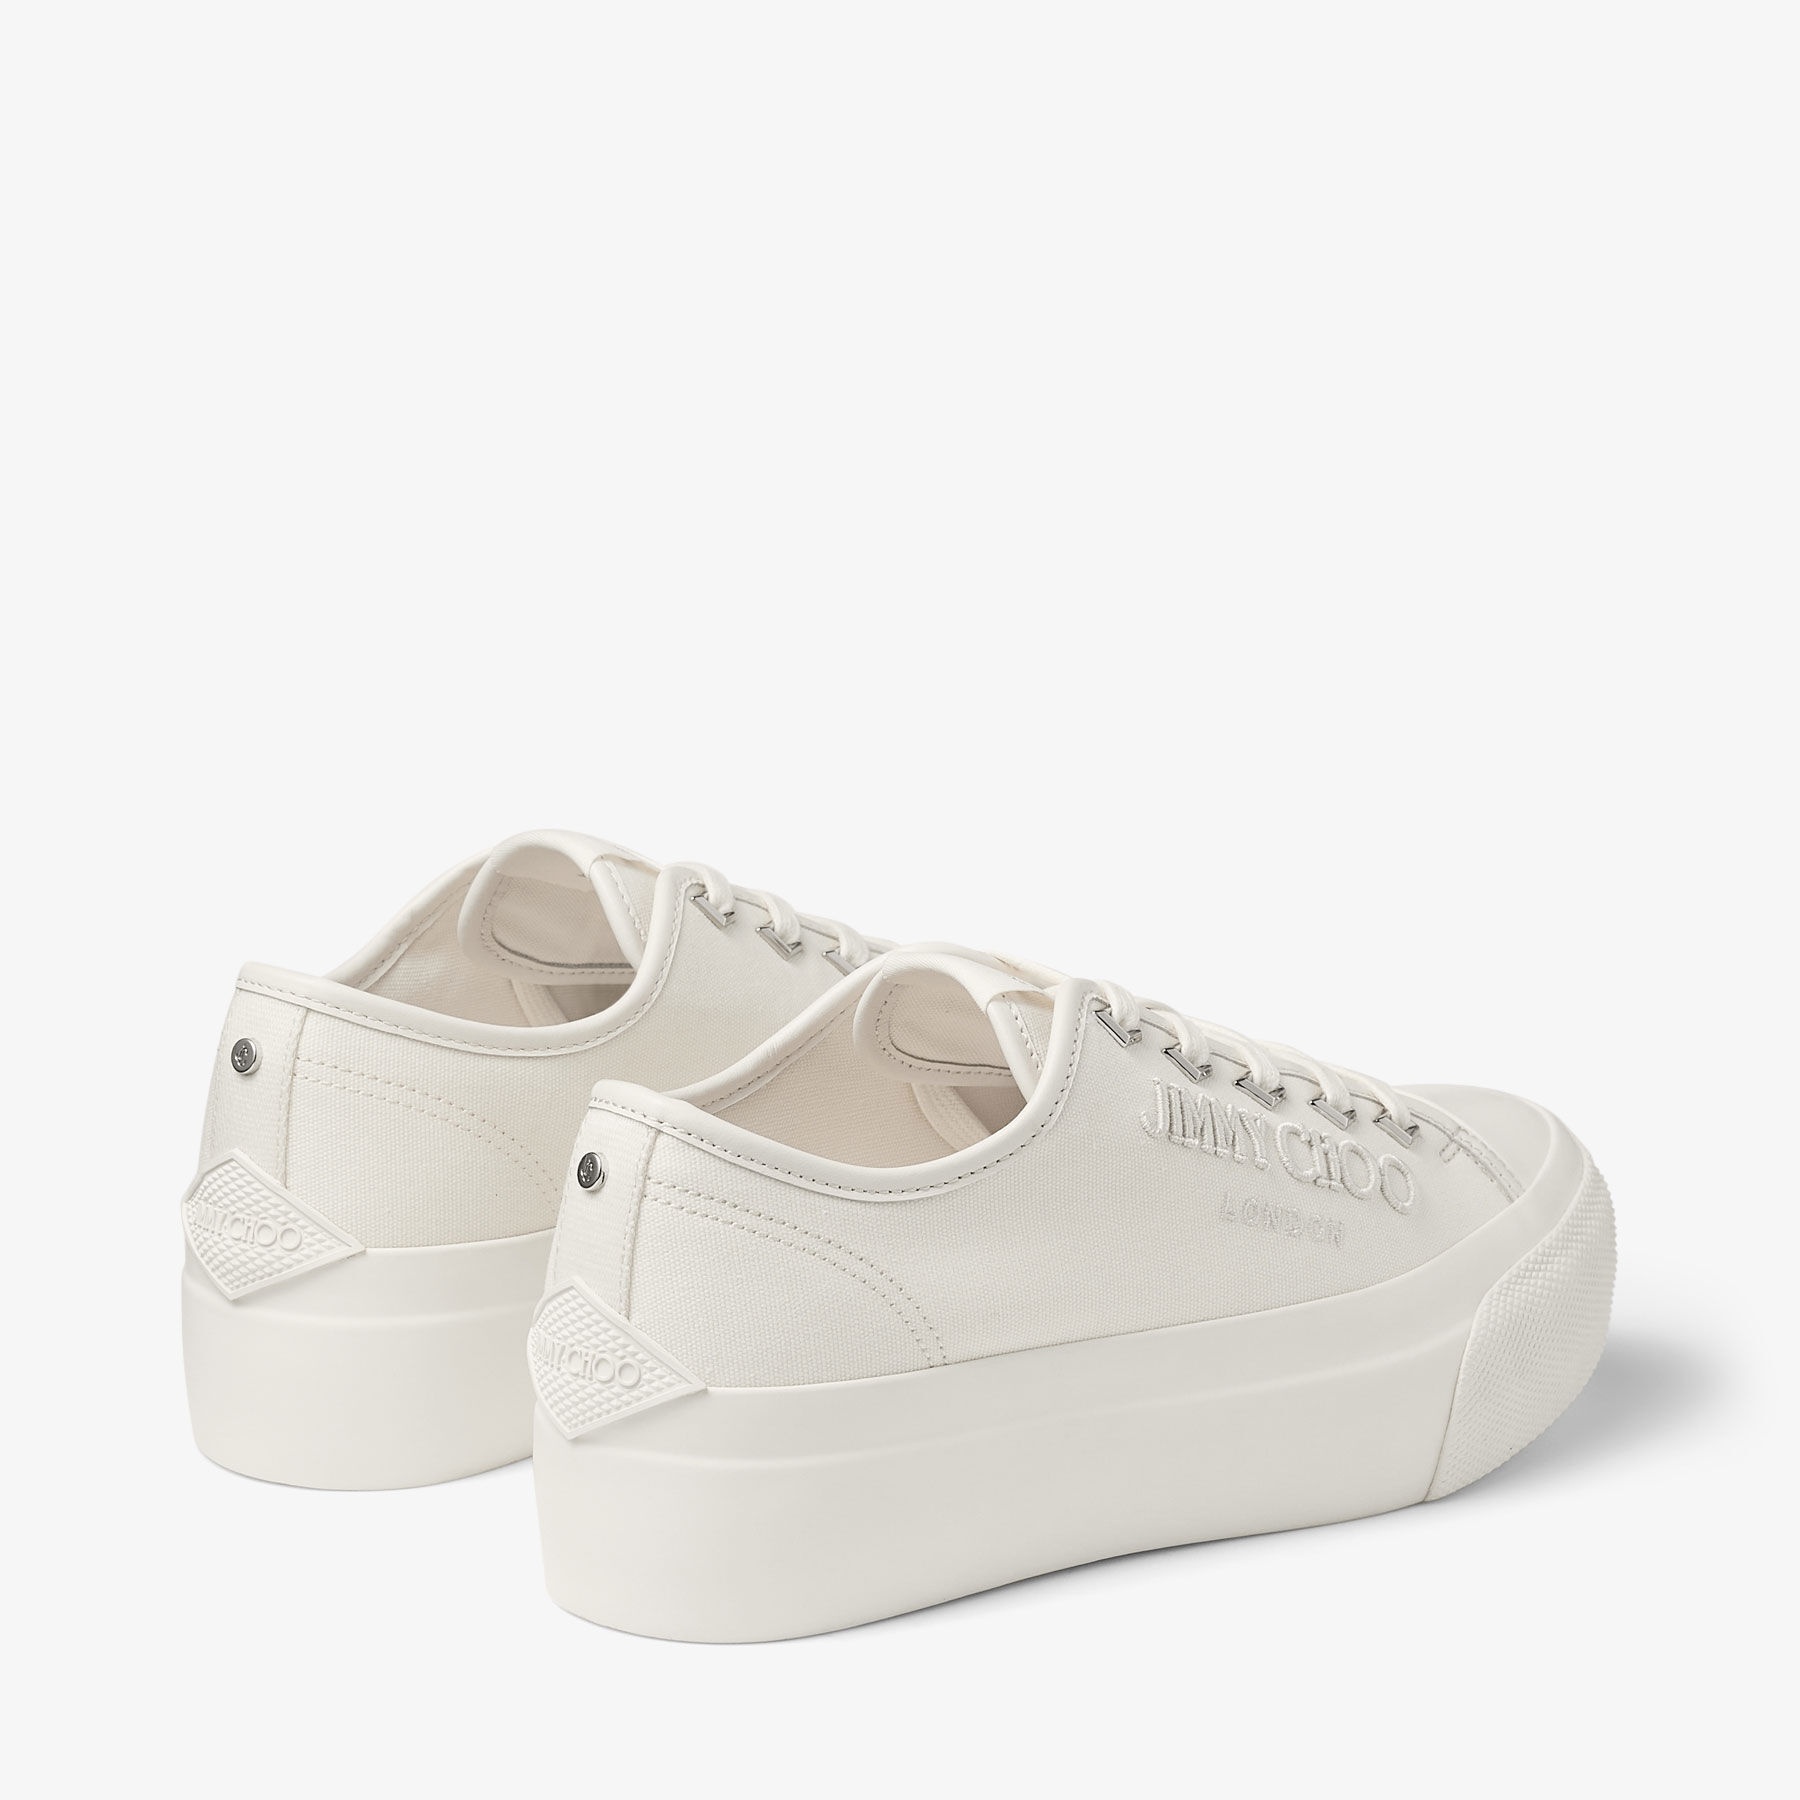 Palma Maxi/F
Latte Canvas Platform Trainers with Embroidered Logo - 6